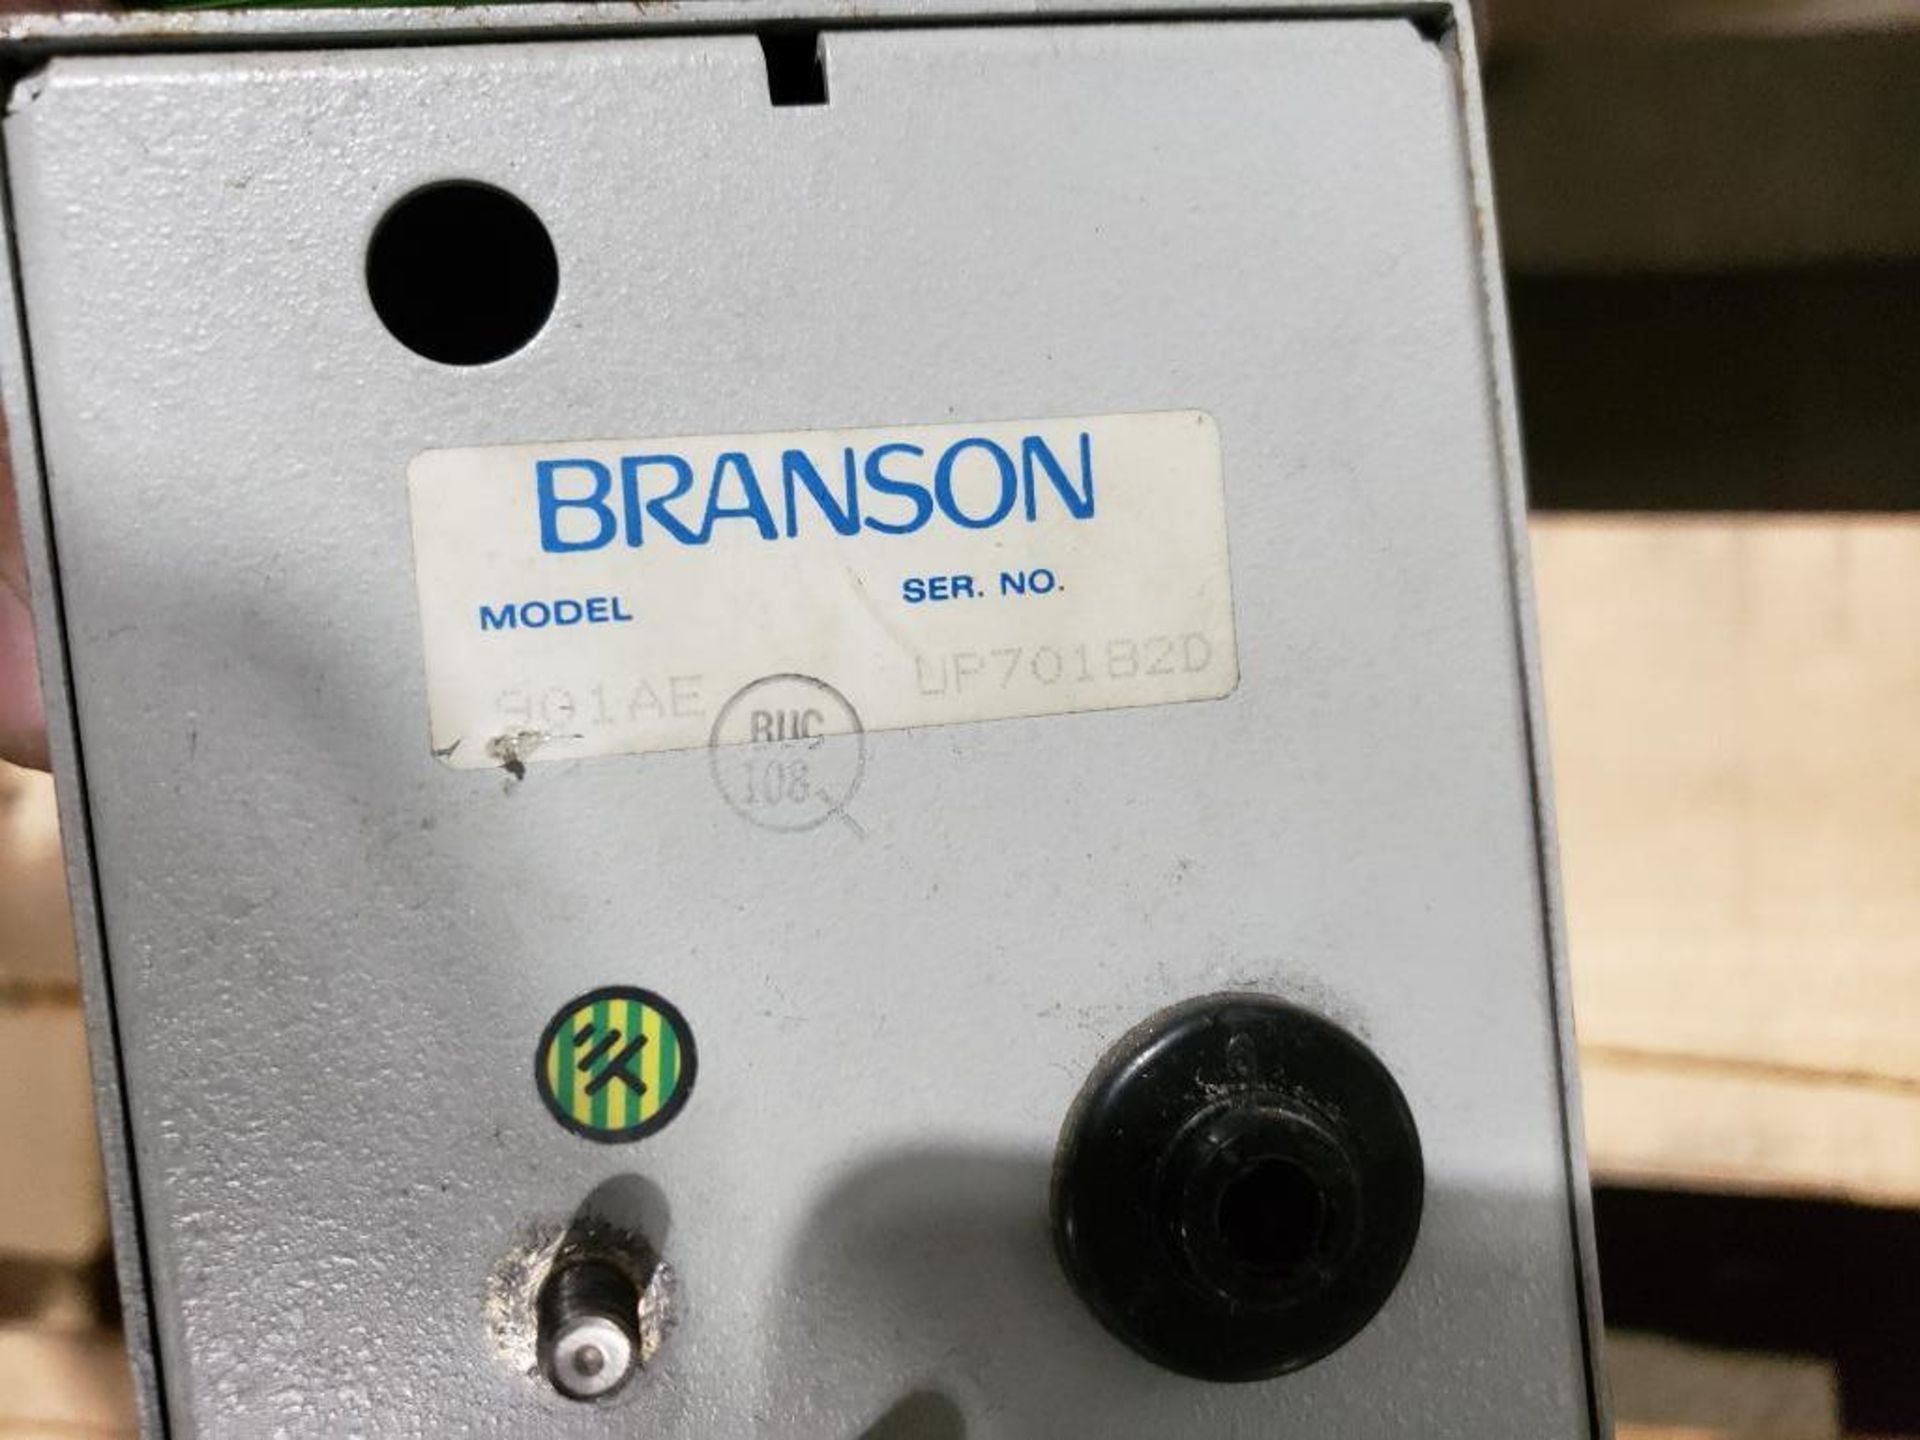 Qty 3 - Parts repairable Branson ultrasonic welder 900 series actuator. Model 901AE. - Image 4 of 9